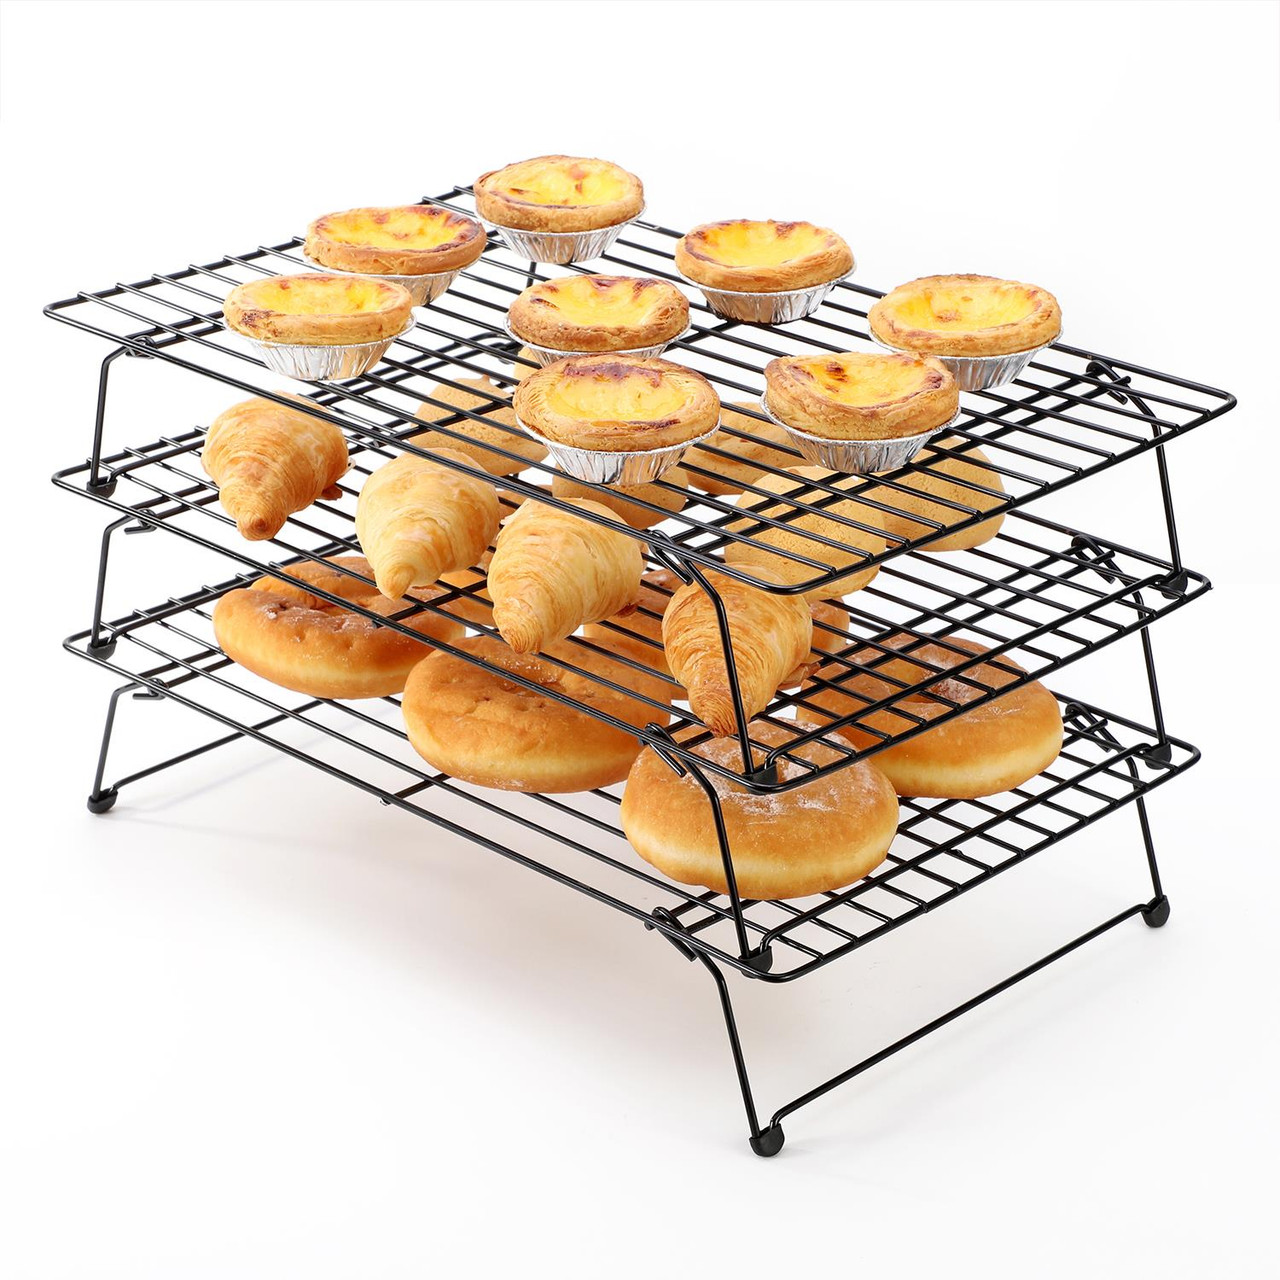 Vinsani Set of 3 High-Carbon Steel Tier Non-Stick Cooling Rack, Collapsible  & Expanded Wire Rack Cooling Oven Tray - Vinsani Ltd.